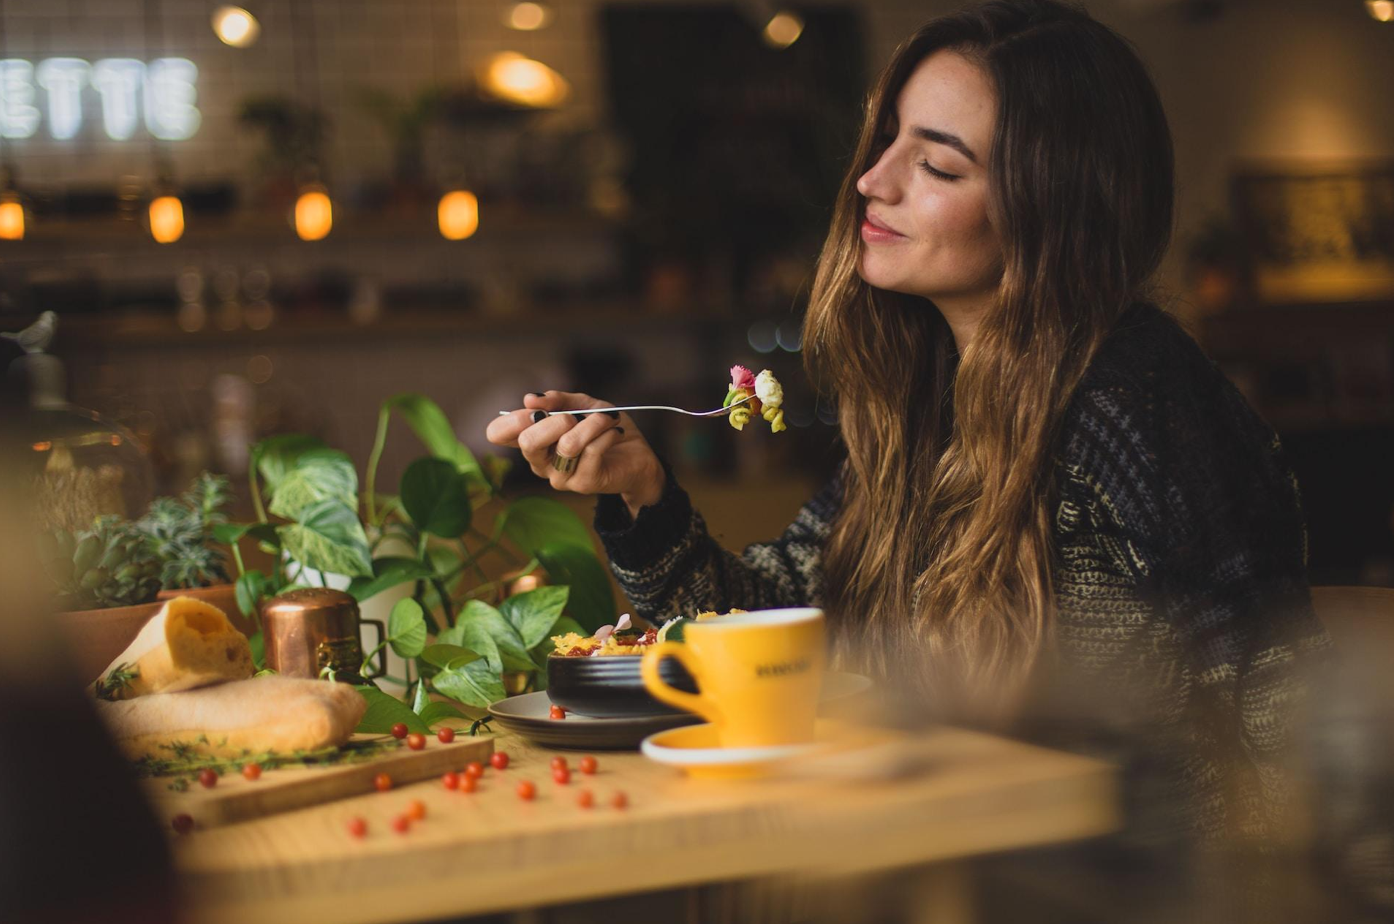 Woman at table holding fork; image by Pablo Merchán Montes, via Unsplash.com.